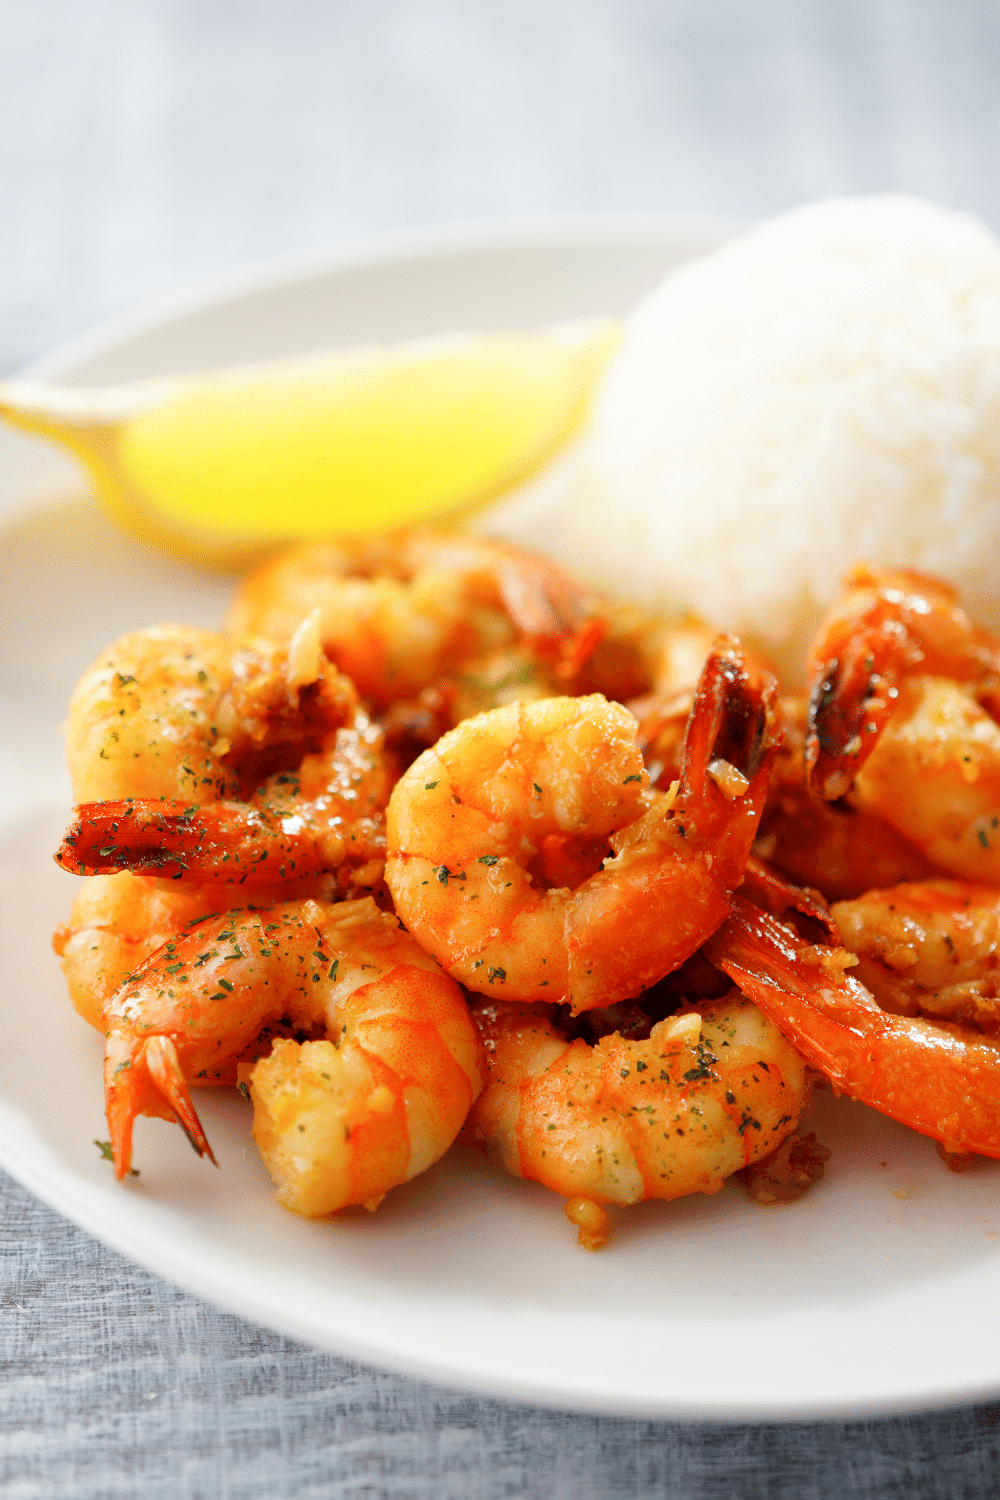 The Top 5 Marinades For Shrimp on the Market